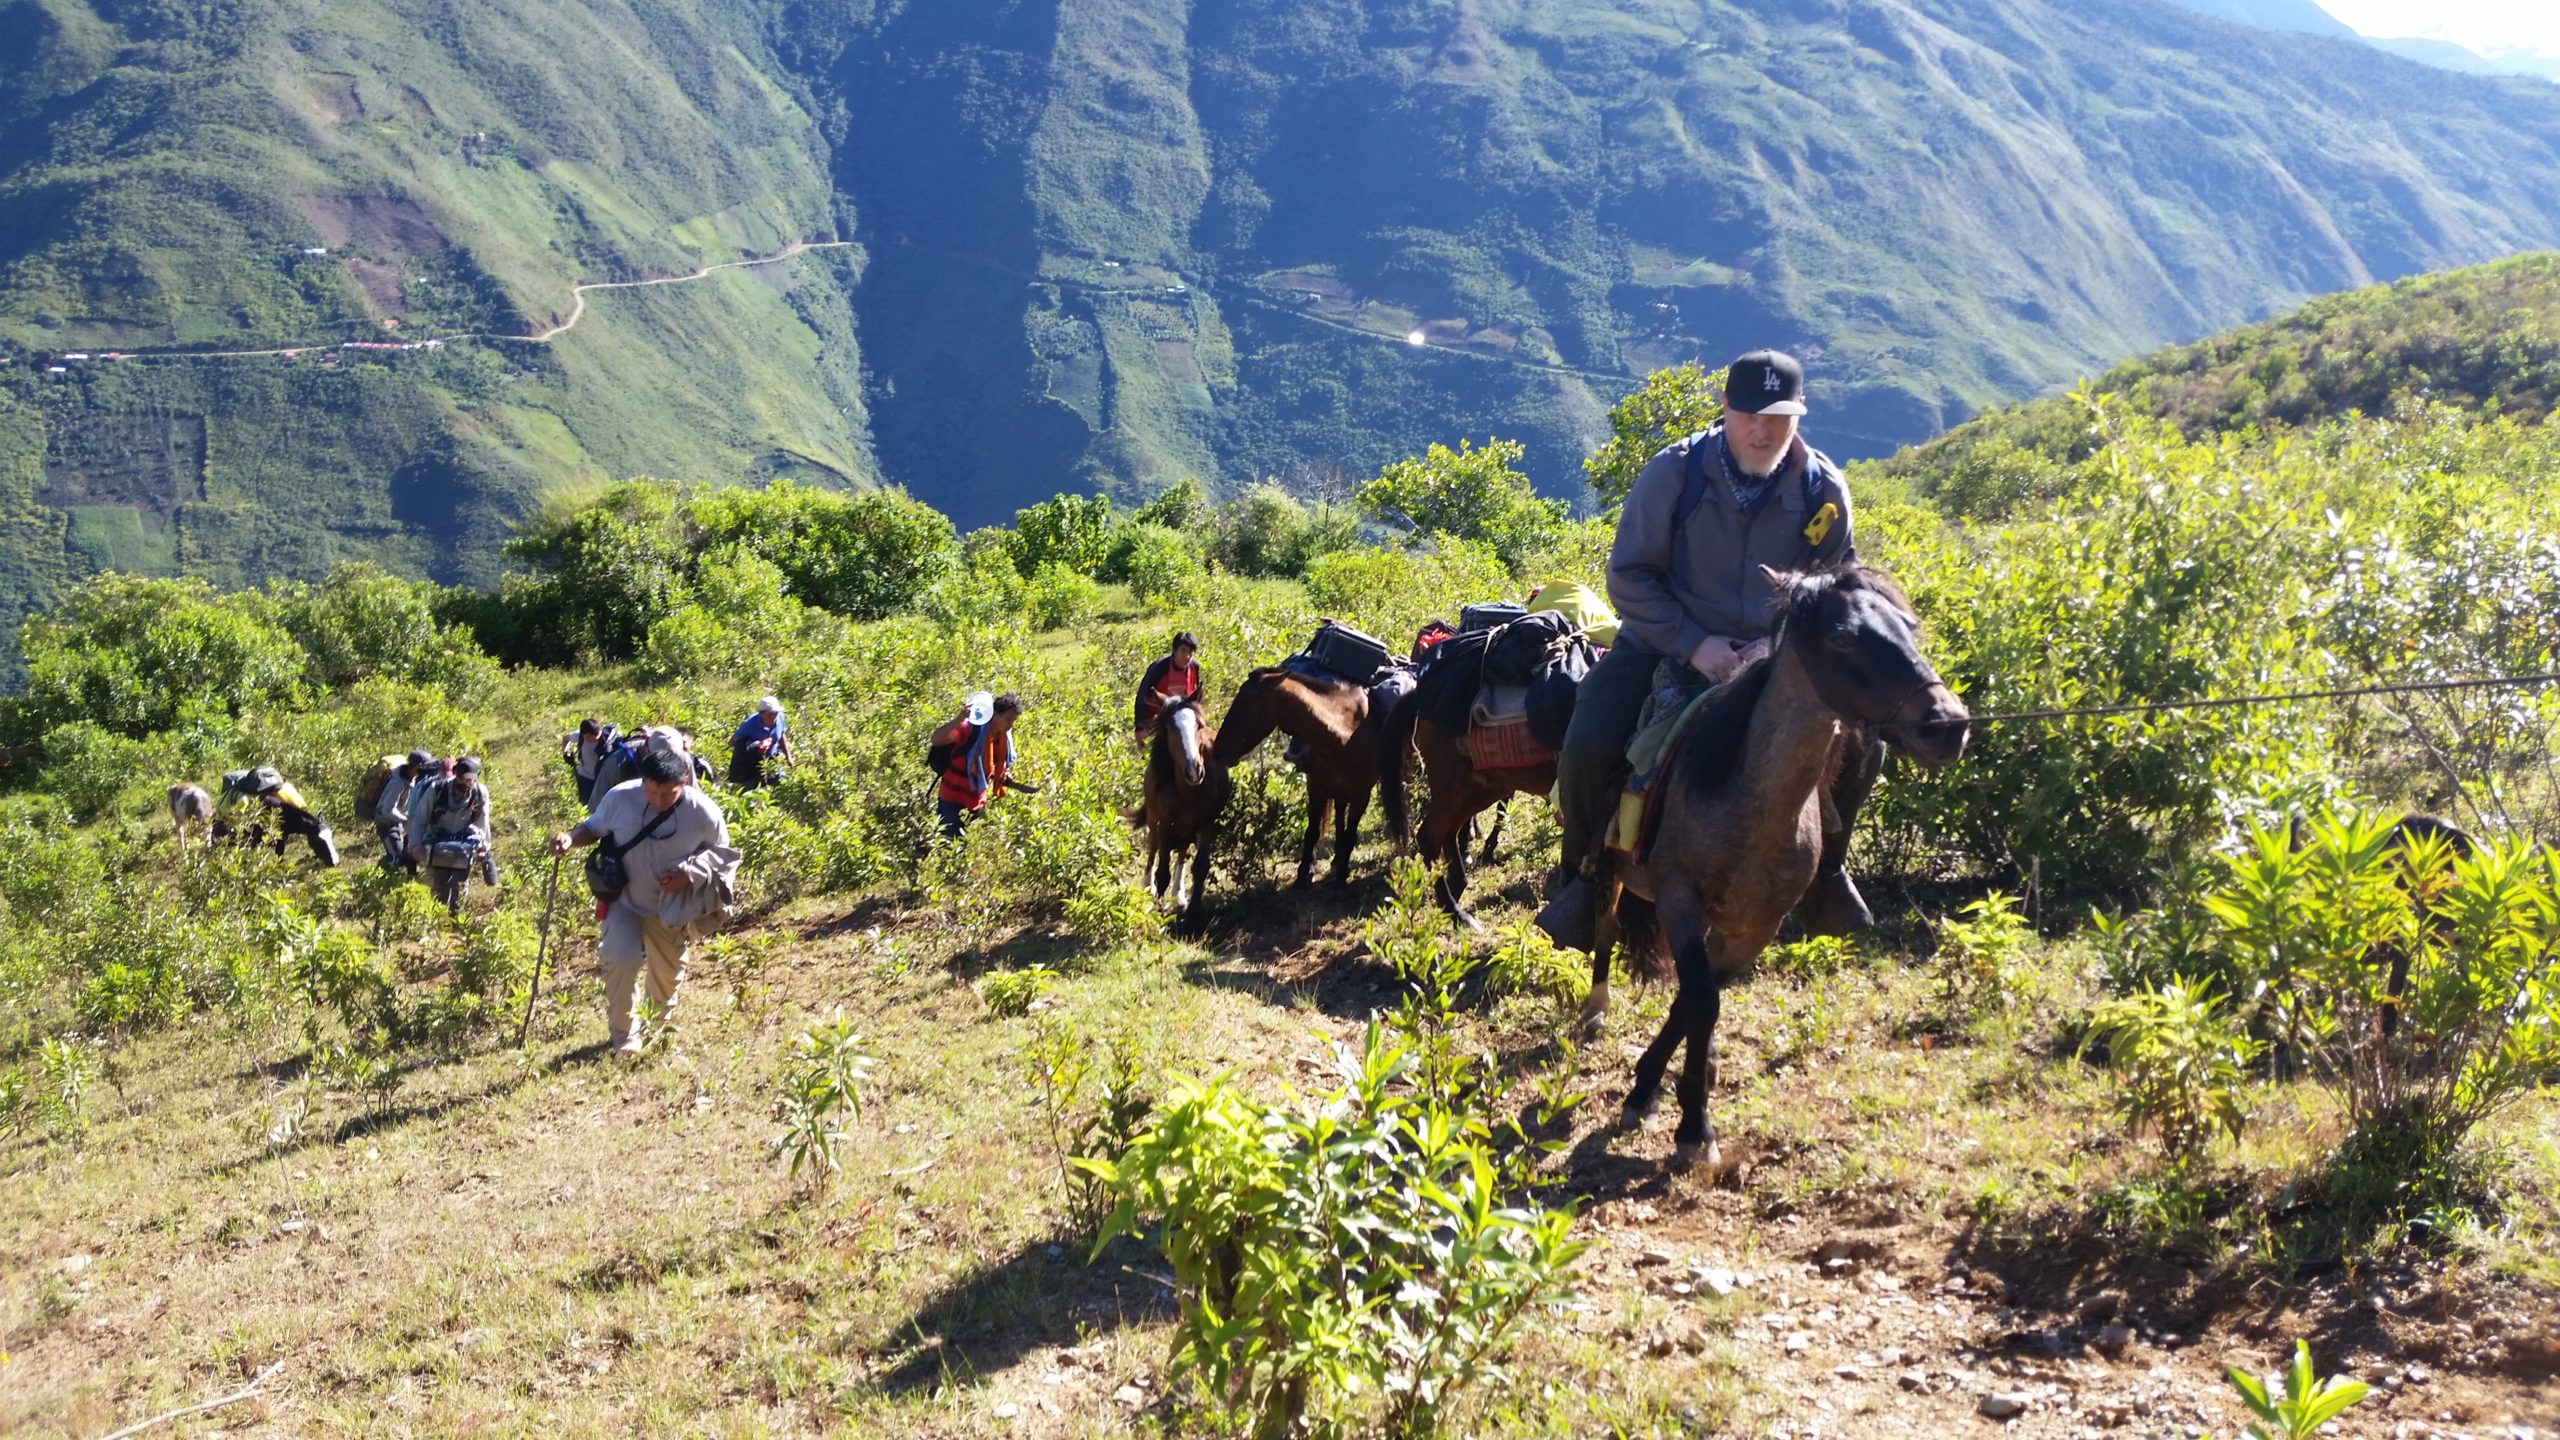 The climb to the ruins by foot and horseback was steep.